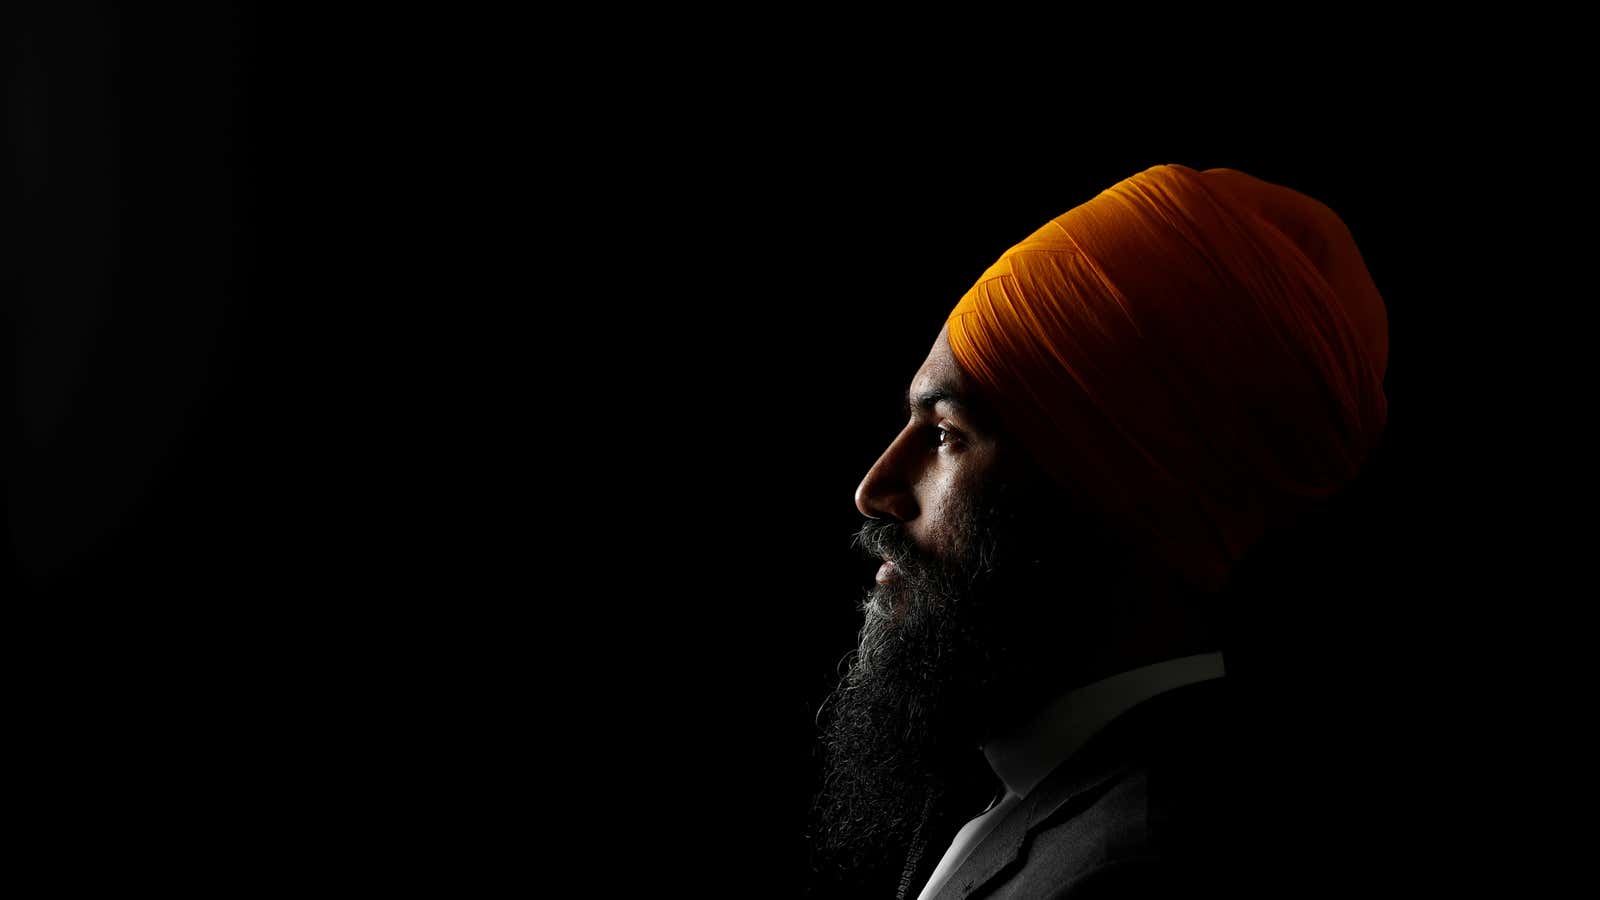 The first ethnic minority to lead a major Canadian party.